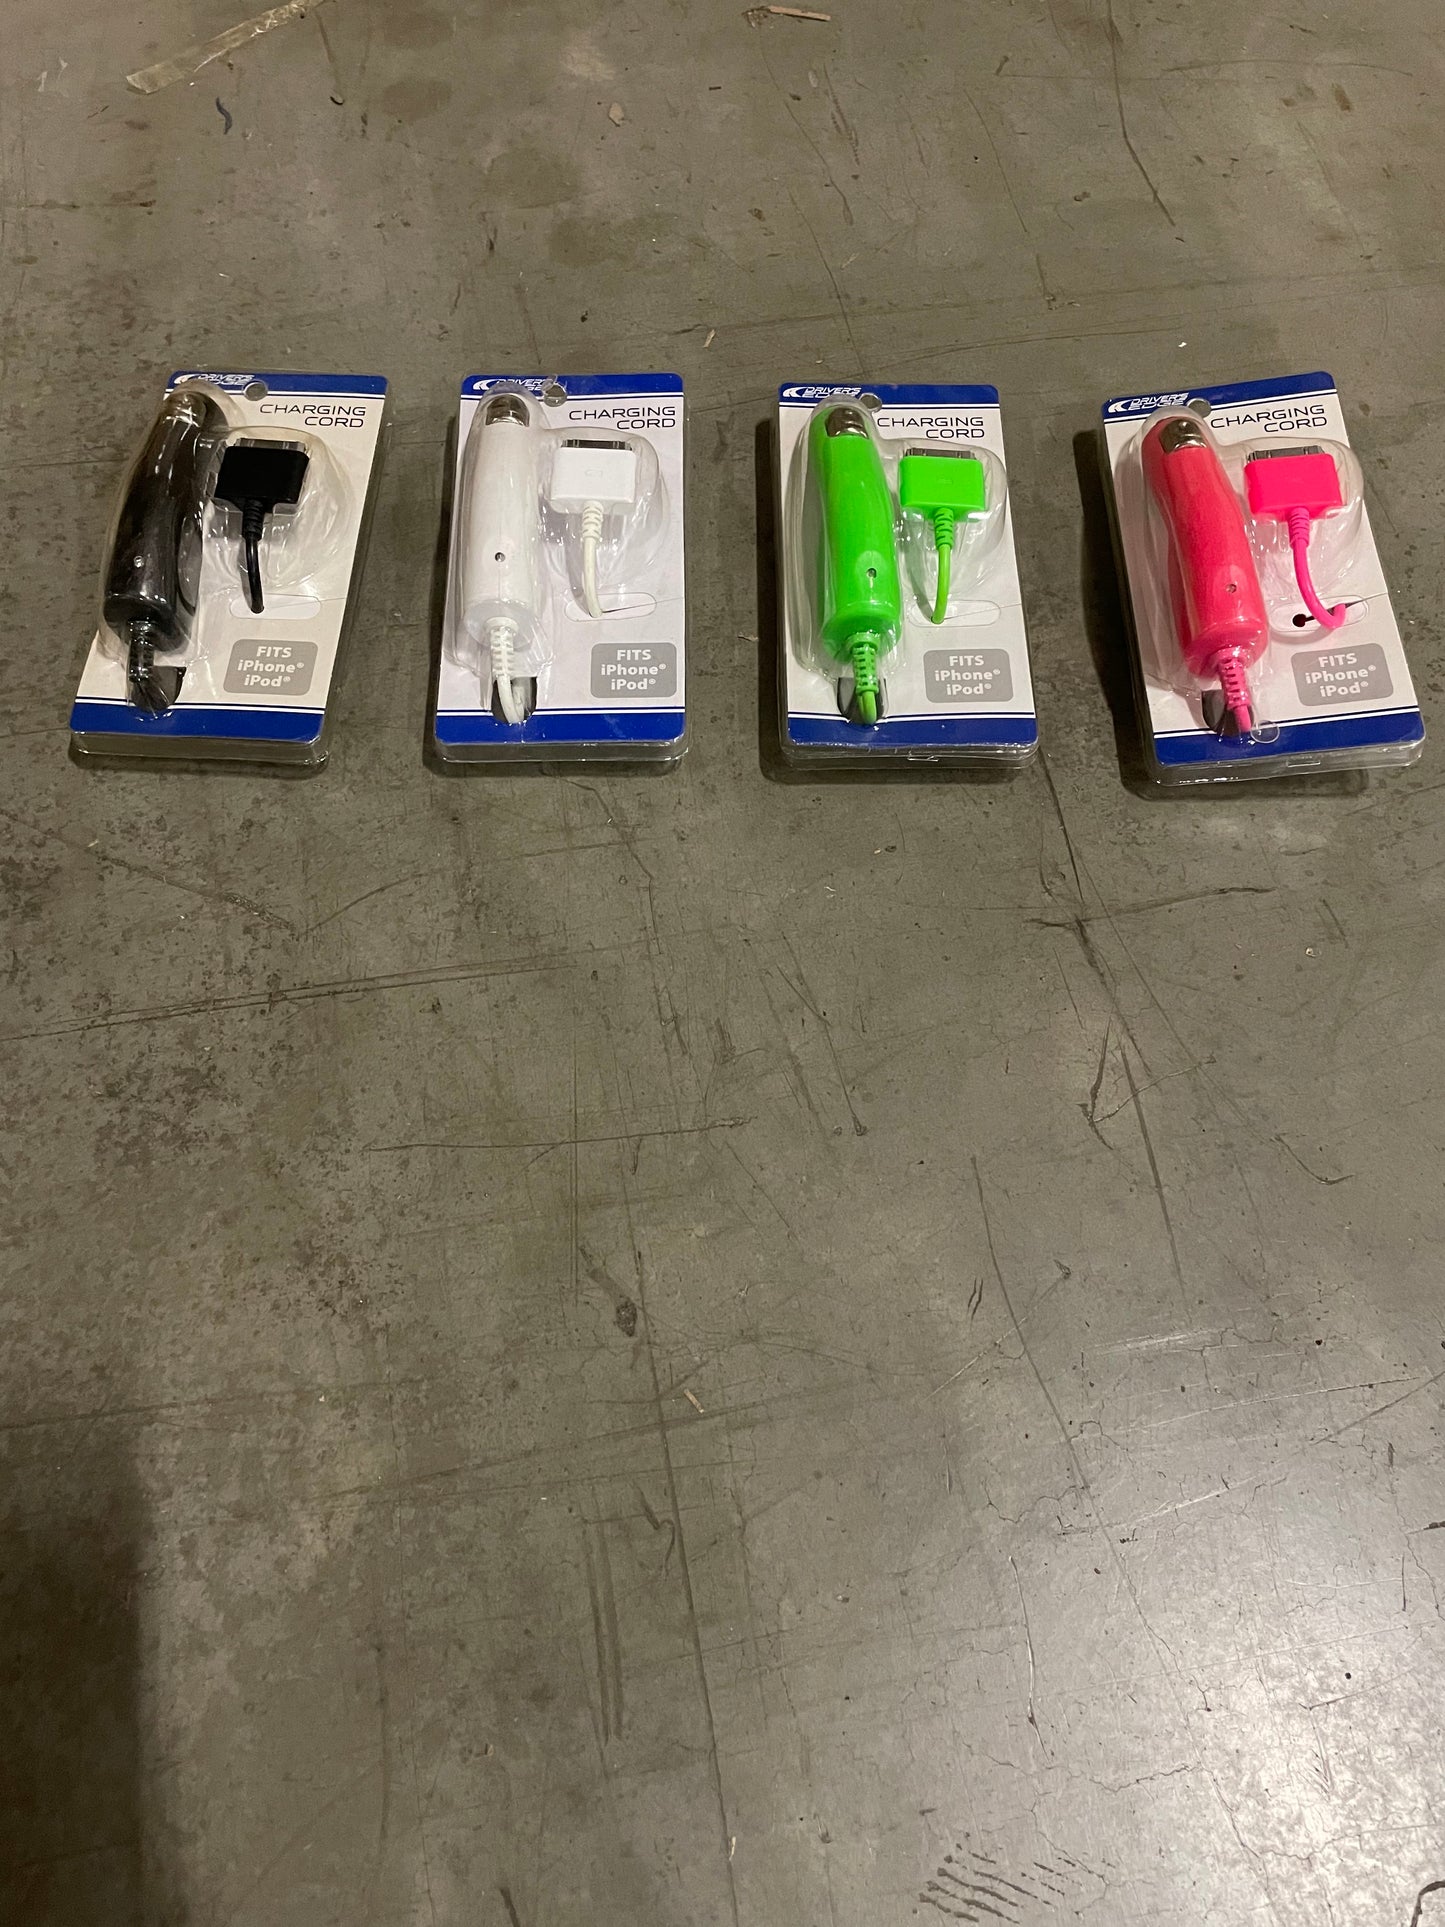 ITEM NUMBER 028833L DE BASIC IPHONE CHARGER - STORE SURPLUS NO DISPLAY 6 PIECES PER PACK